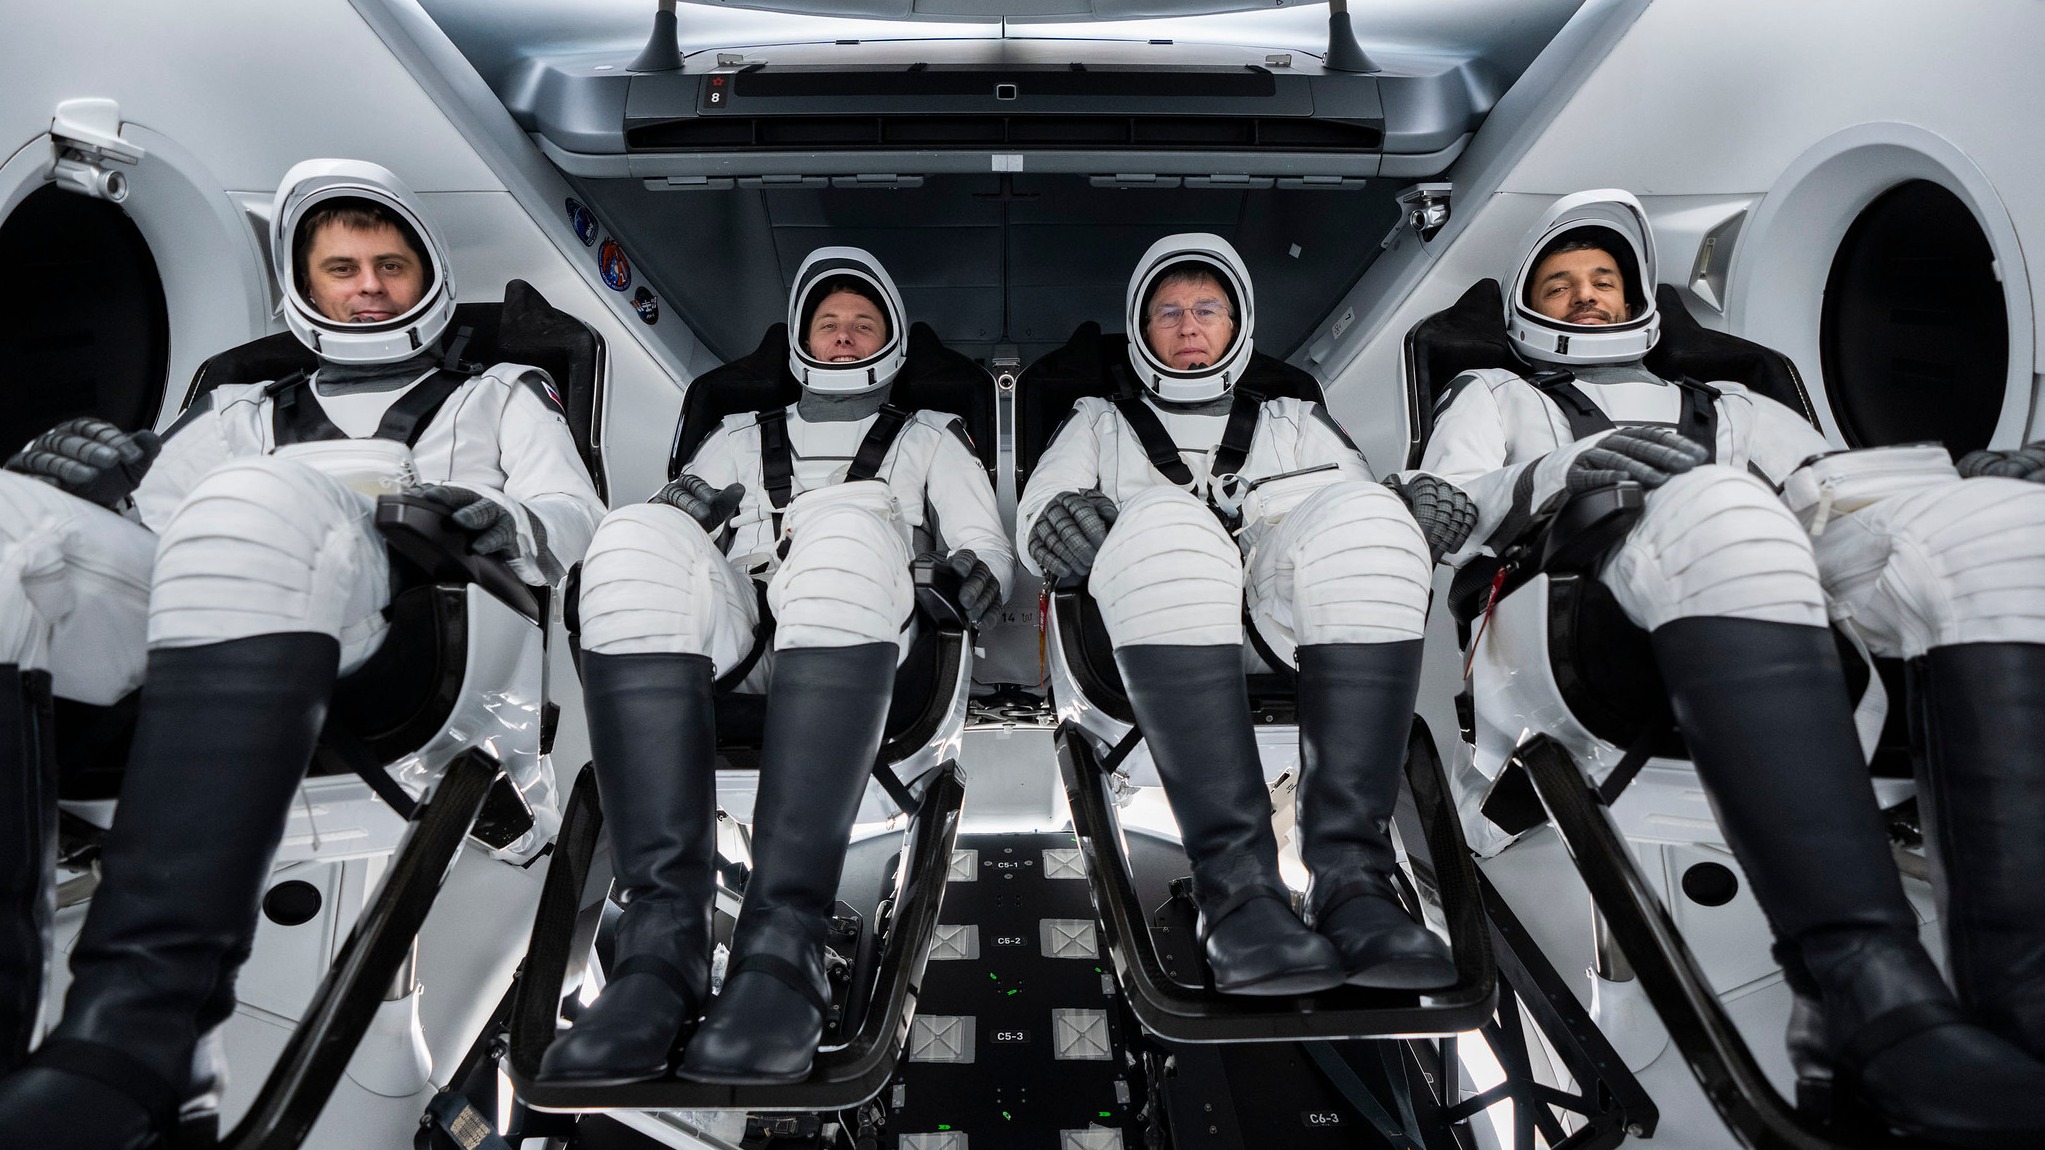 four astronauts seated in a crew dragon with spacesuits and seatbelts